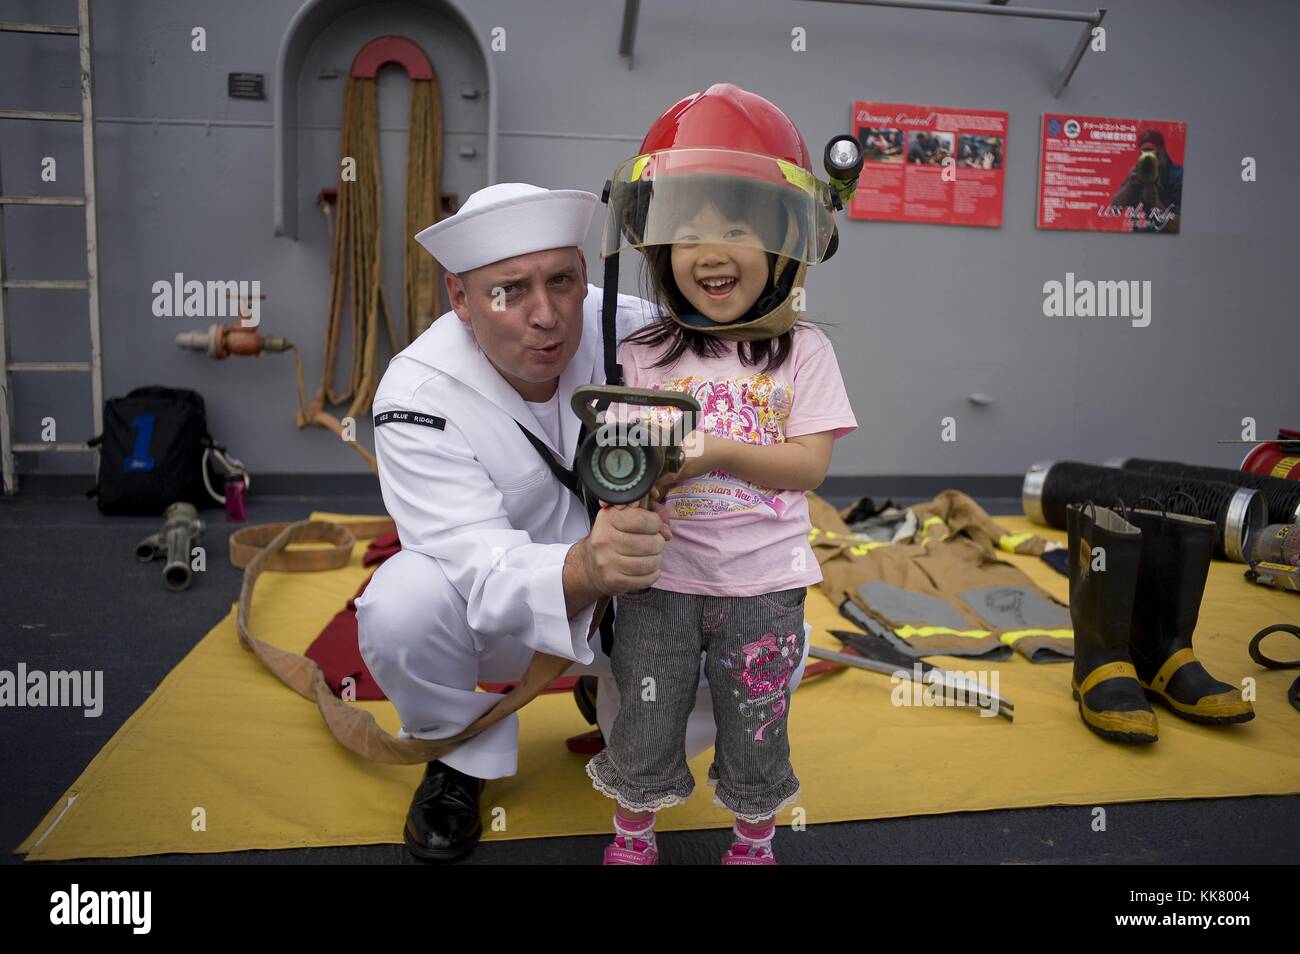 Damage Controlman 1st Class Nathan Alberti, a Sailor aboard the US 7th Fleet flagship USS Blue Ridge LCC 19, gives a fire fighting demonstration to a child during an open ship tour in Tokyo, Japan, 2012. Image courtesy Mass Communication Specialist 3rd Class Fidel C. Hart/US Navy. Stock Photo